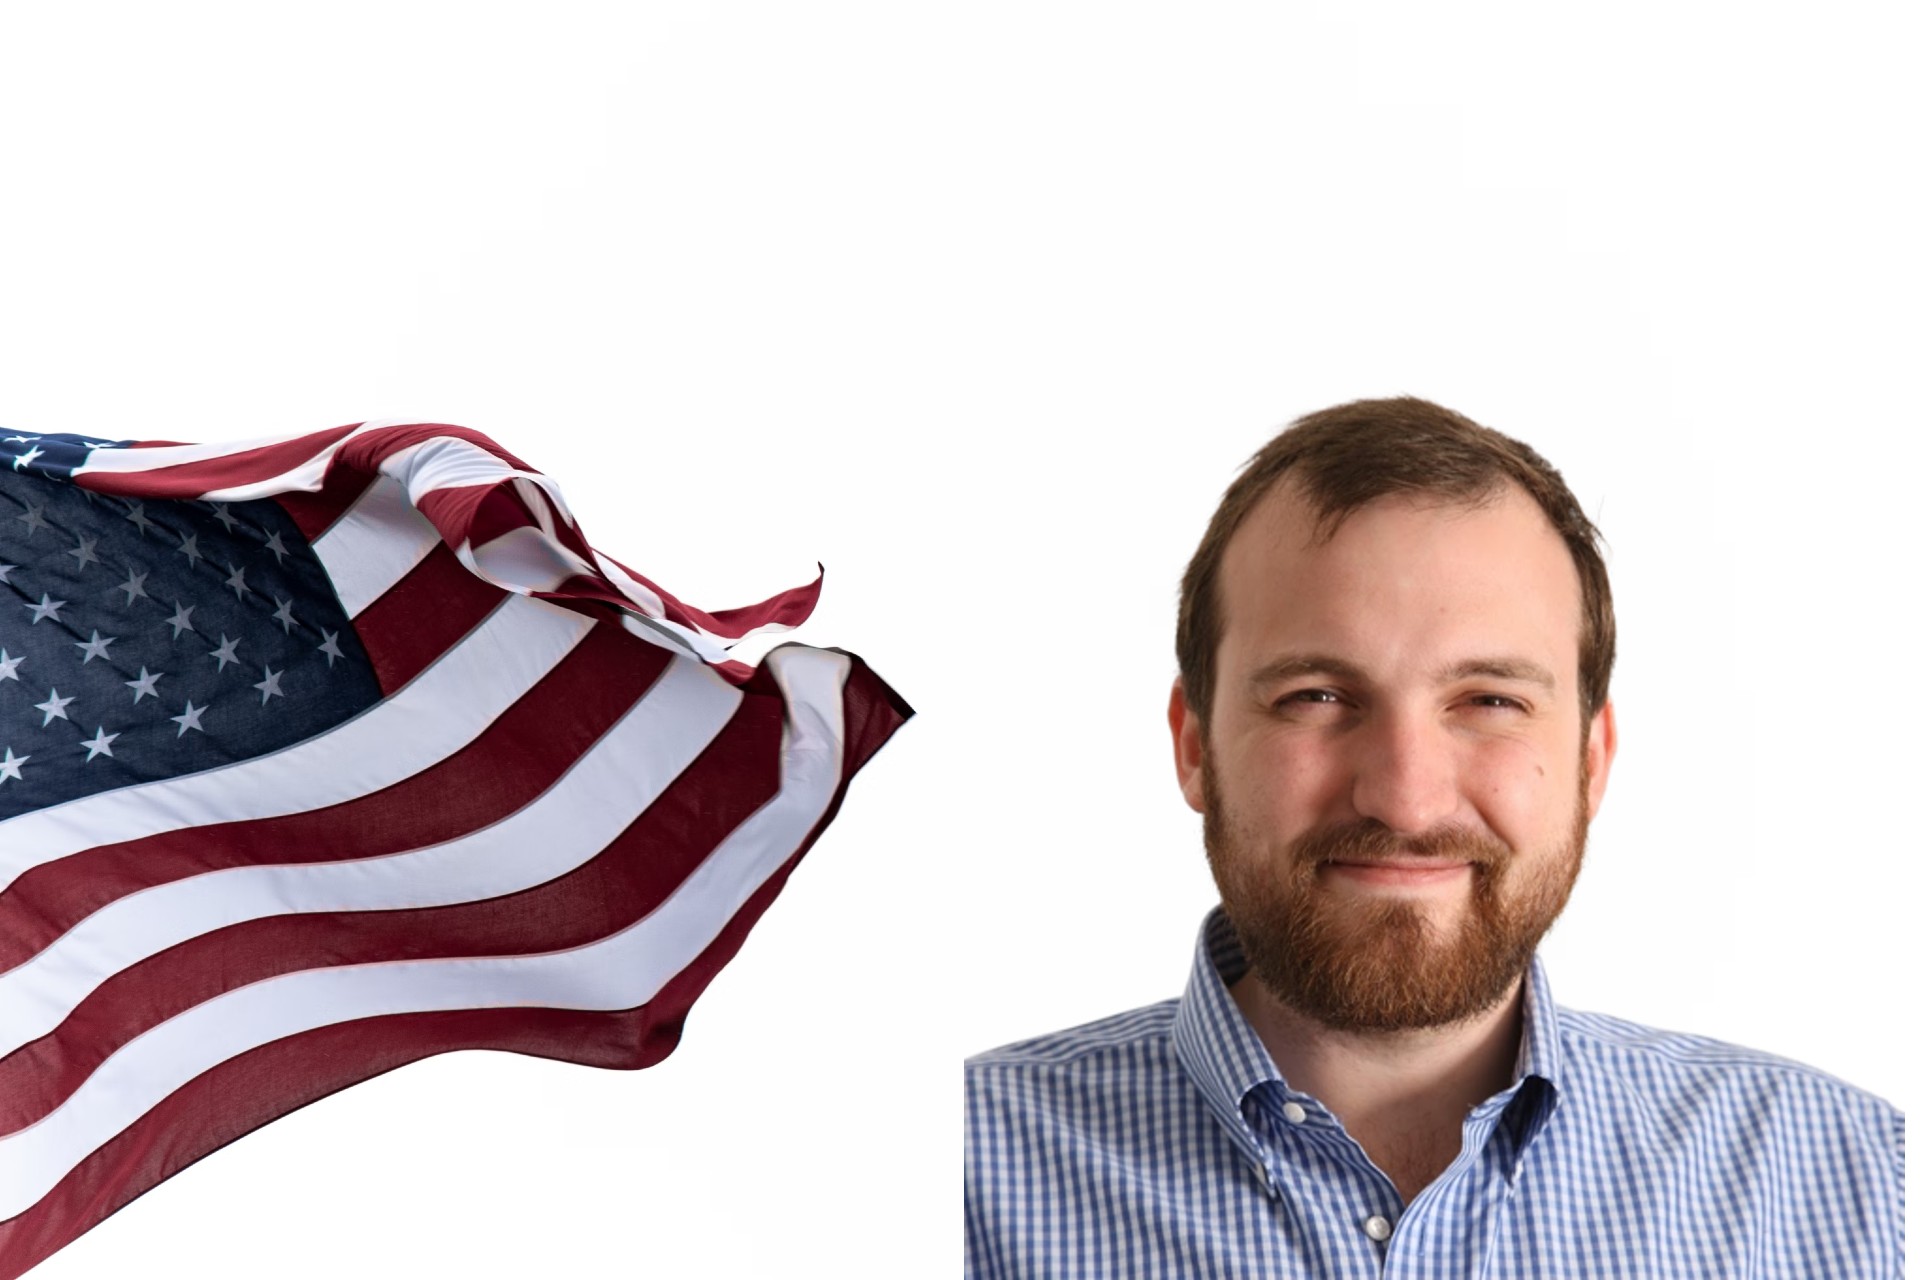 Here’s what Cardano’s founder pitched to the US Congress